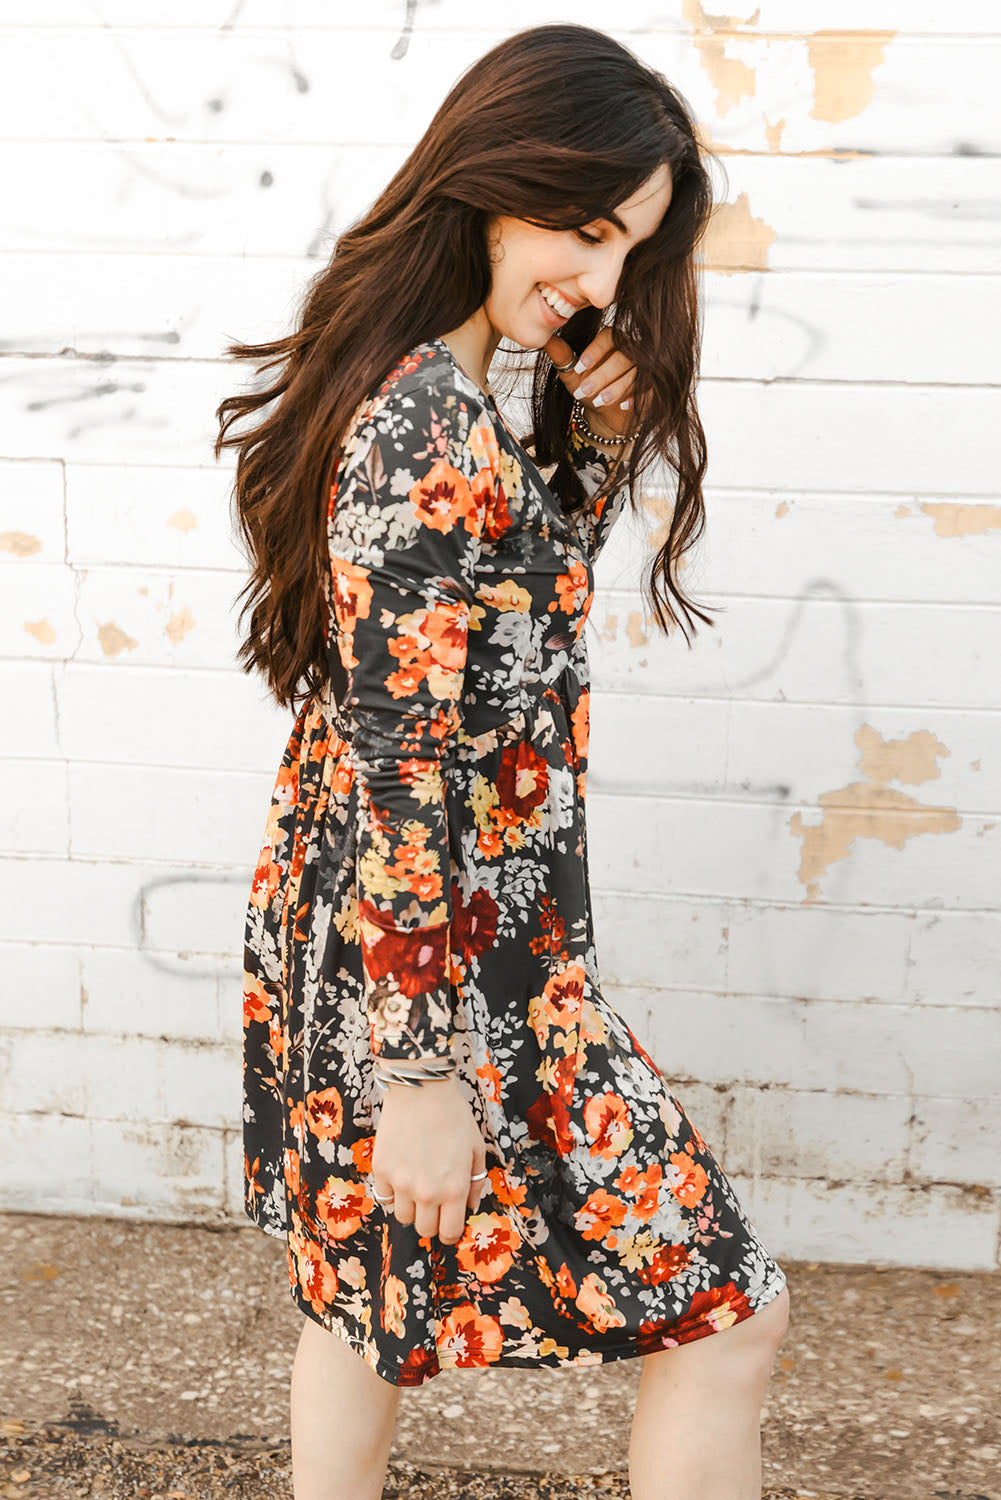 Floral Print Long Sleeve Dress - Online Only